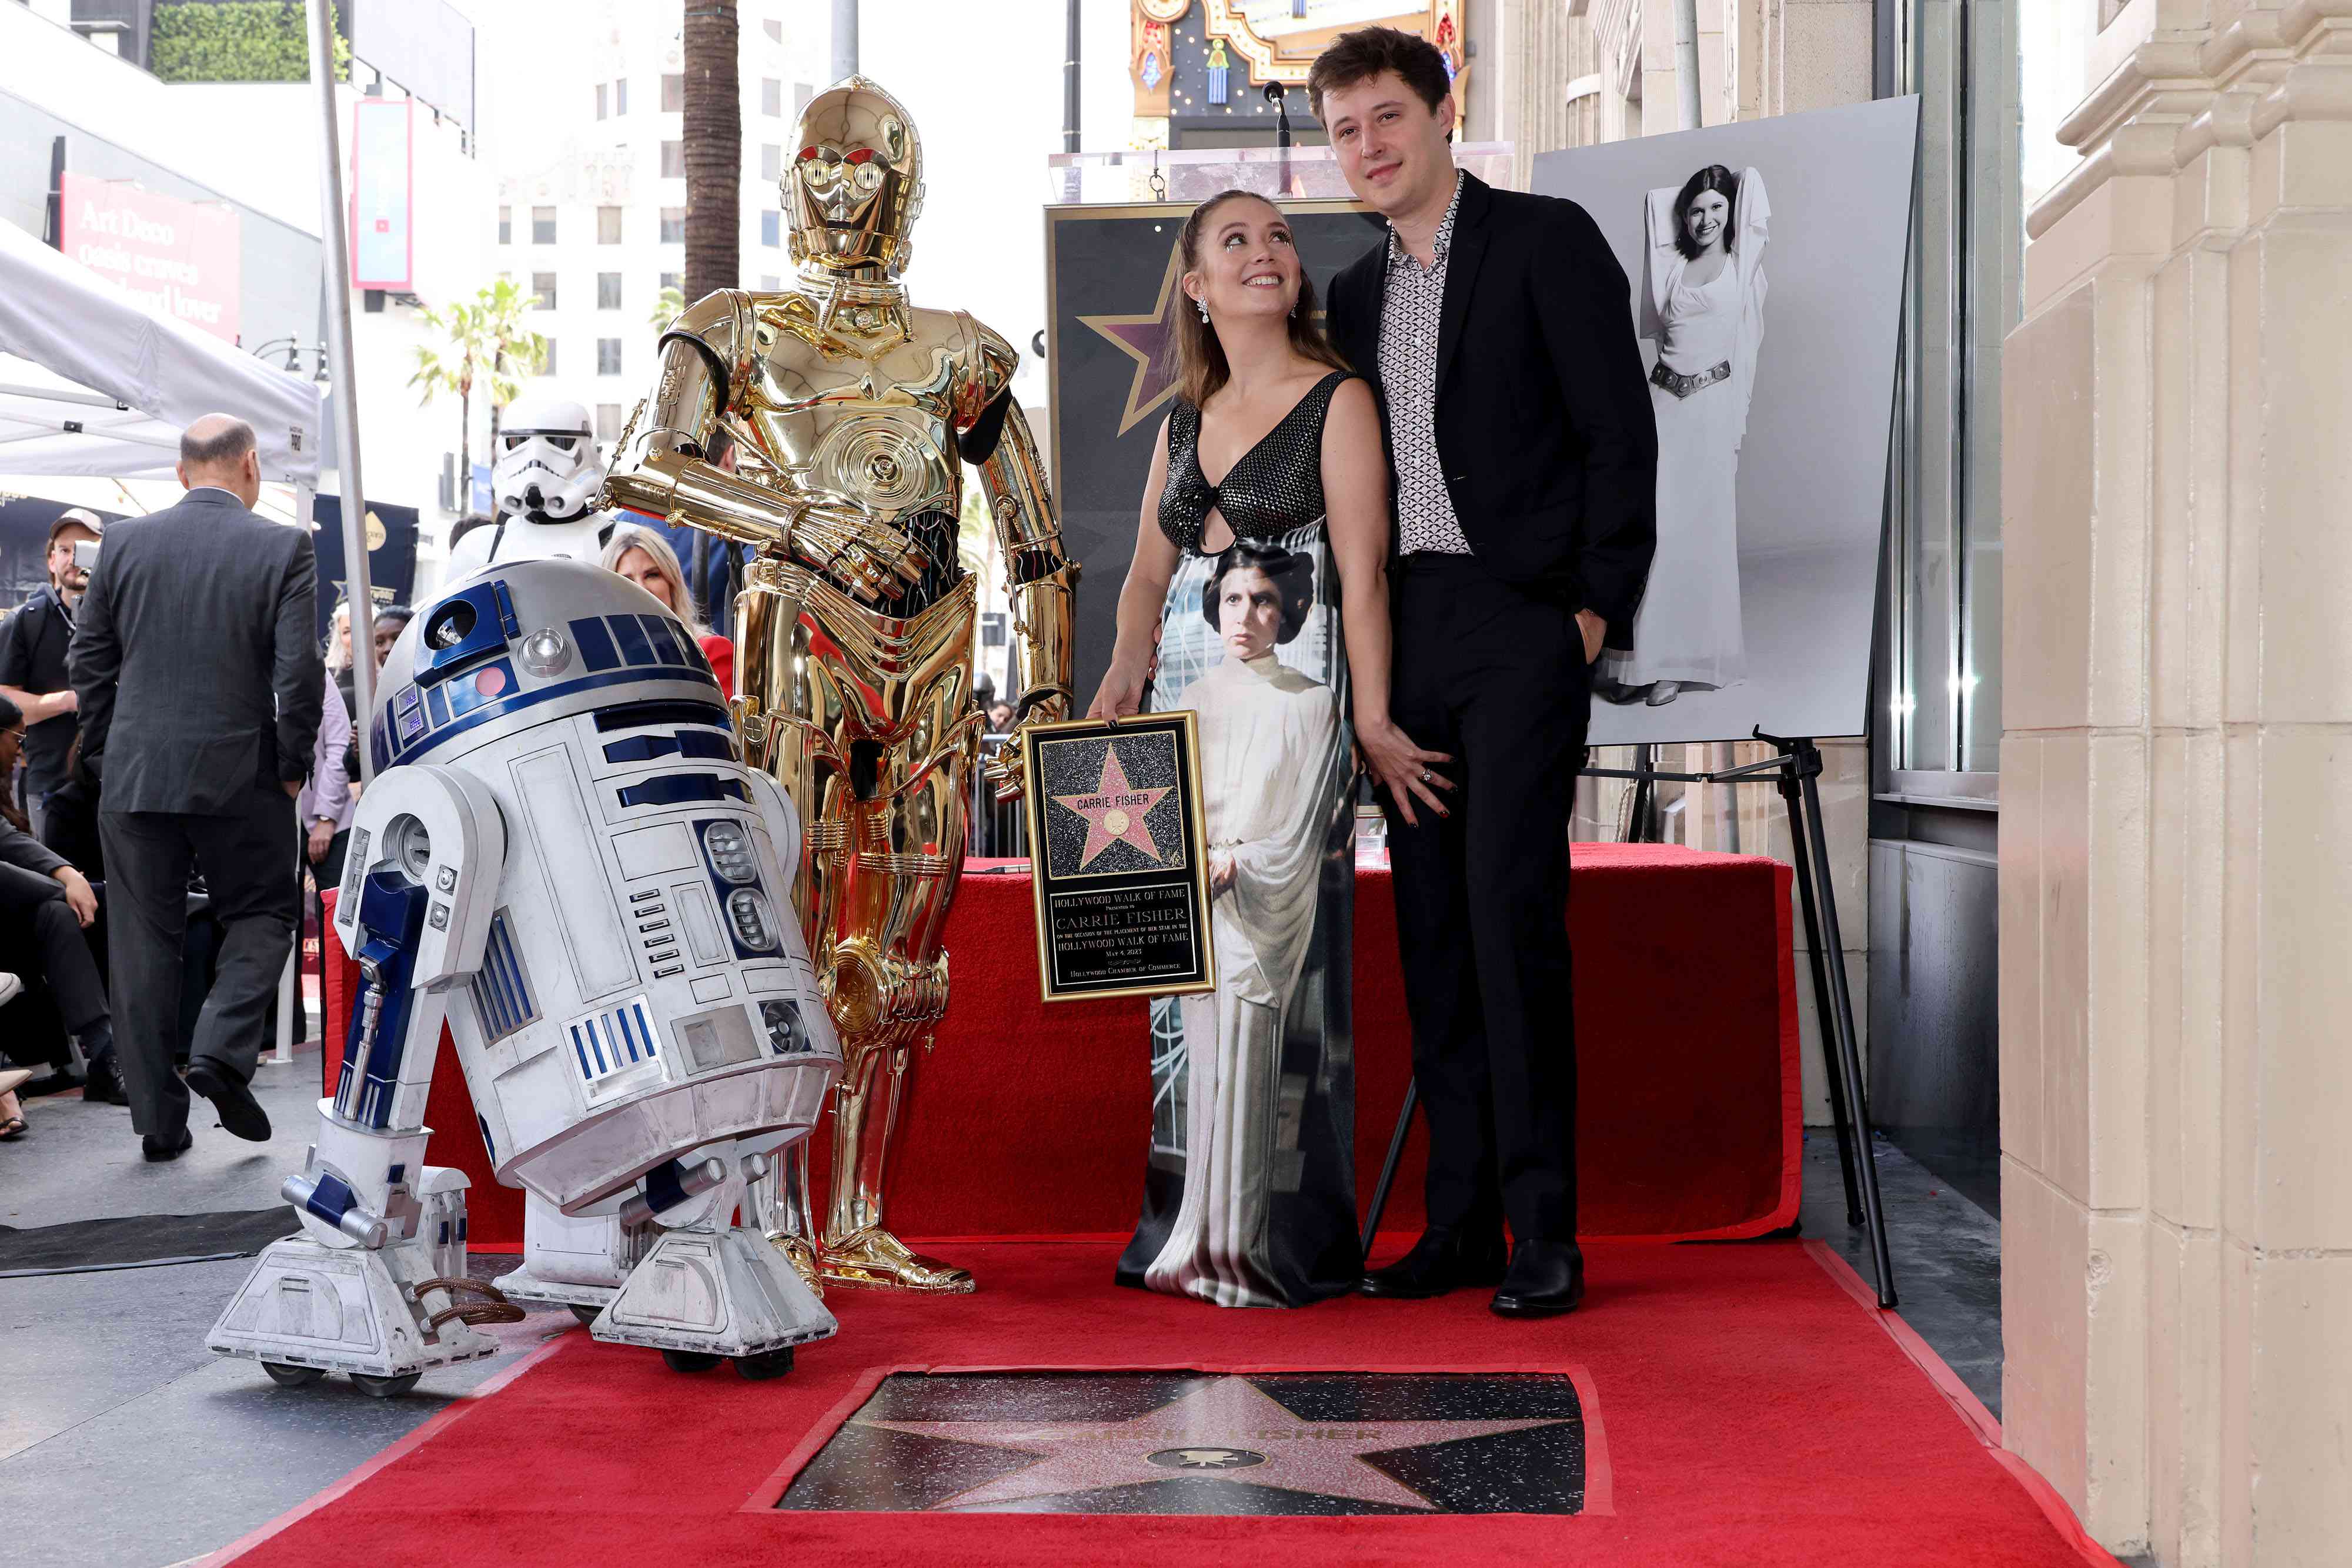 Billie Lourd and Austen Rydell attend the ceremony for Carrie Fisher being honored posthumously with a Star on the Hollywood Walk of Fame on May 04, 2023 in Hollywood, California